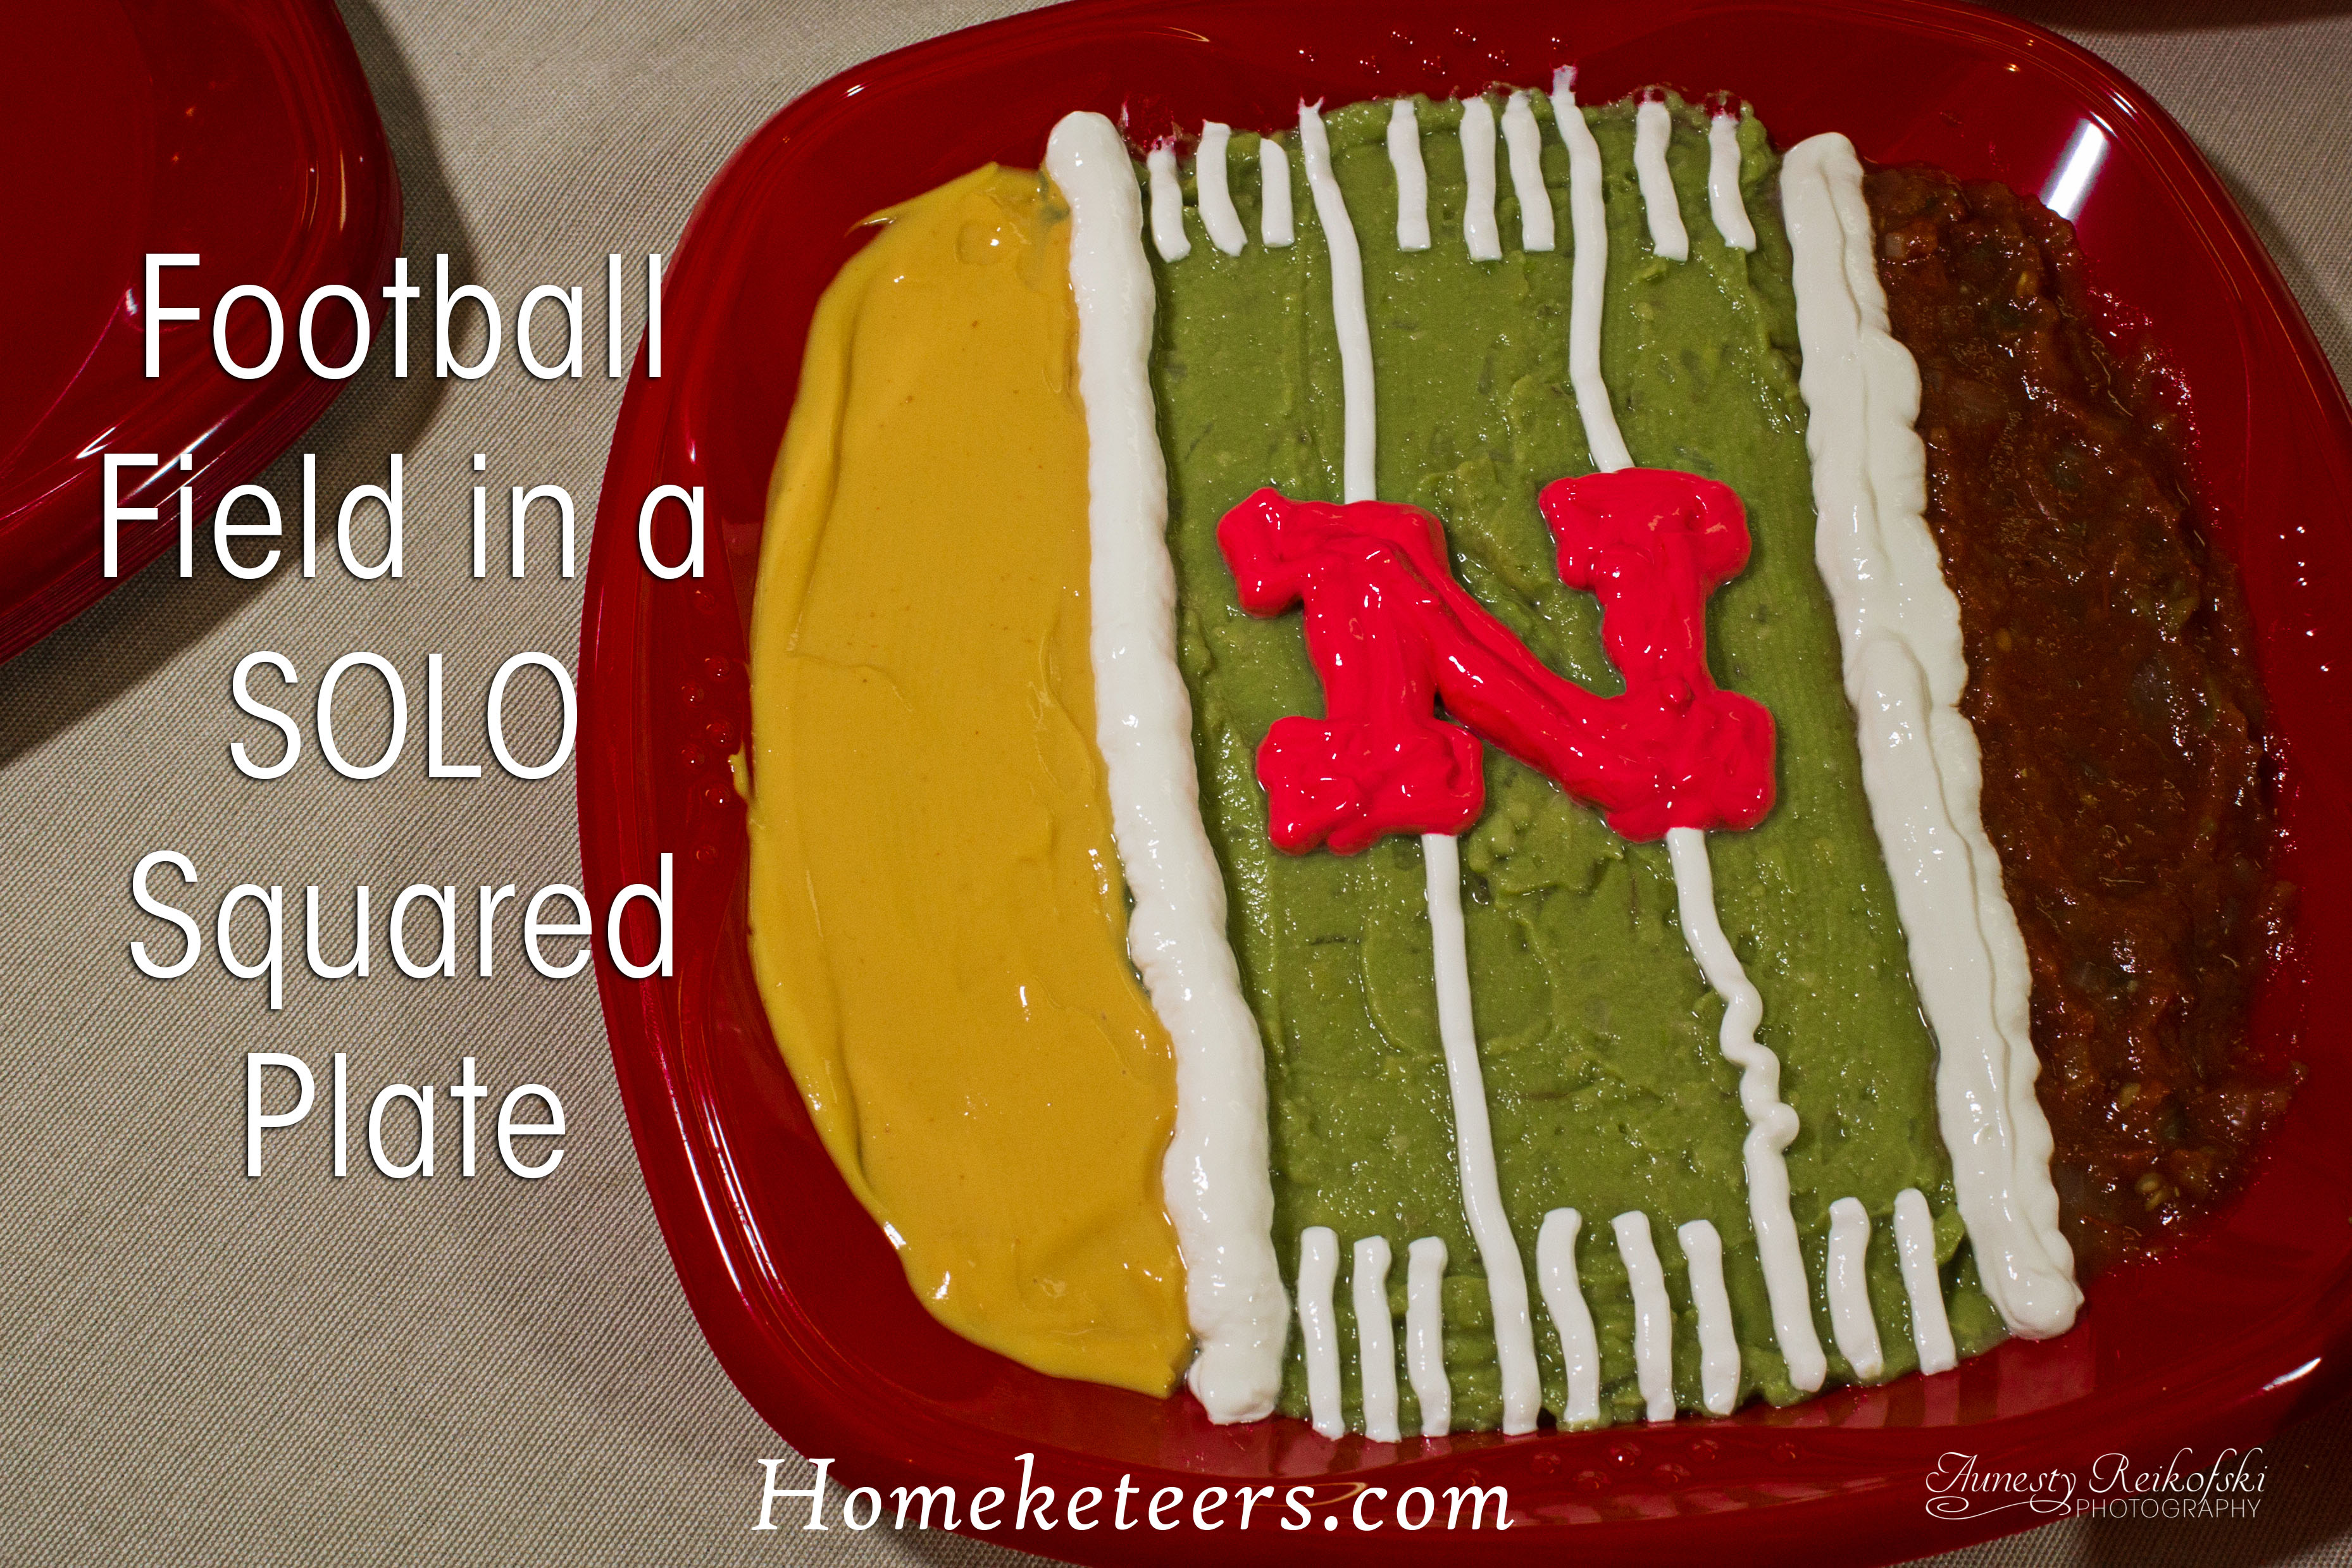 Football Field Dip with Solo Squared Plates - Perfect for Tailgating